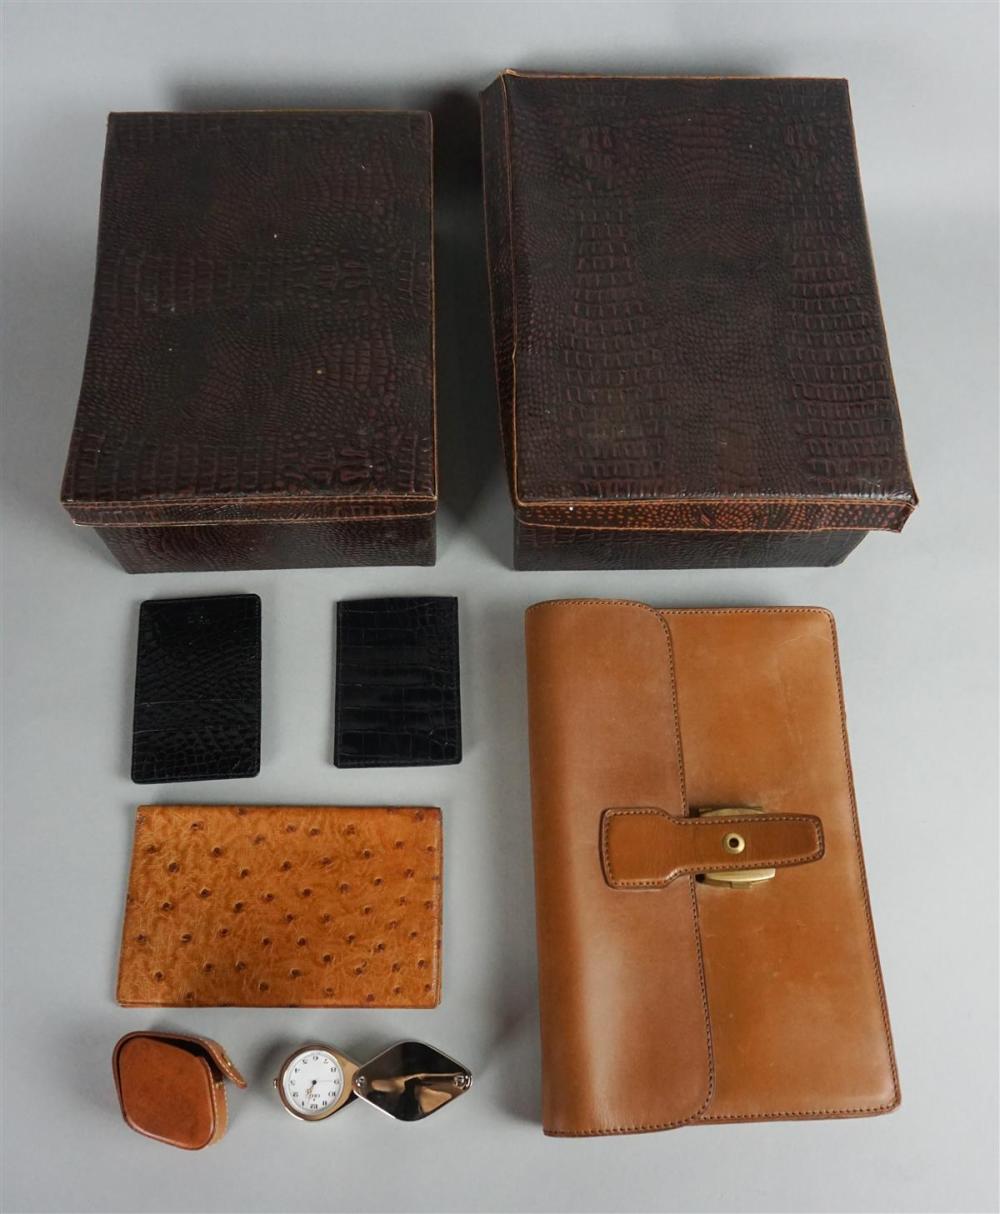 GROUP OF LEATHER AND SKIN ACCESSORIESGROUP 312f8a